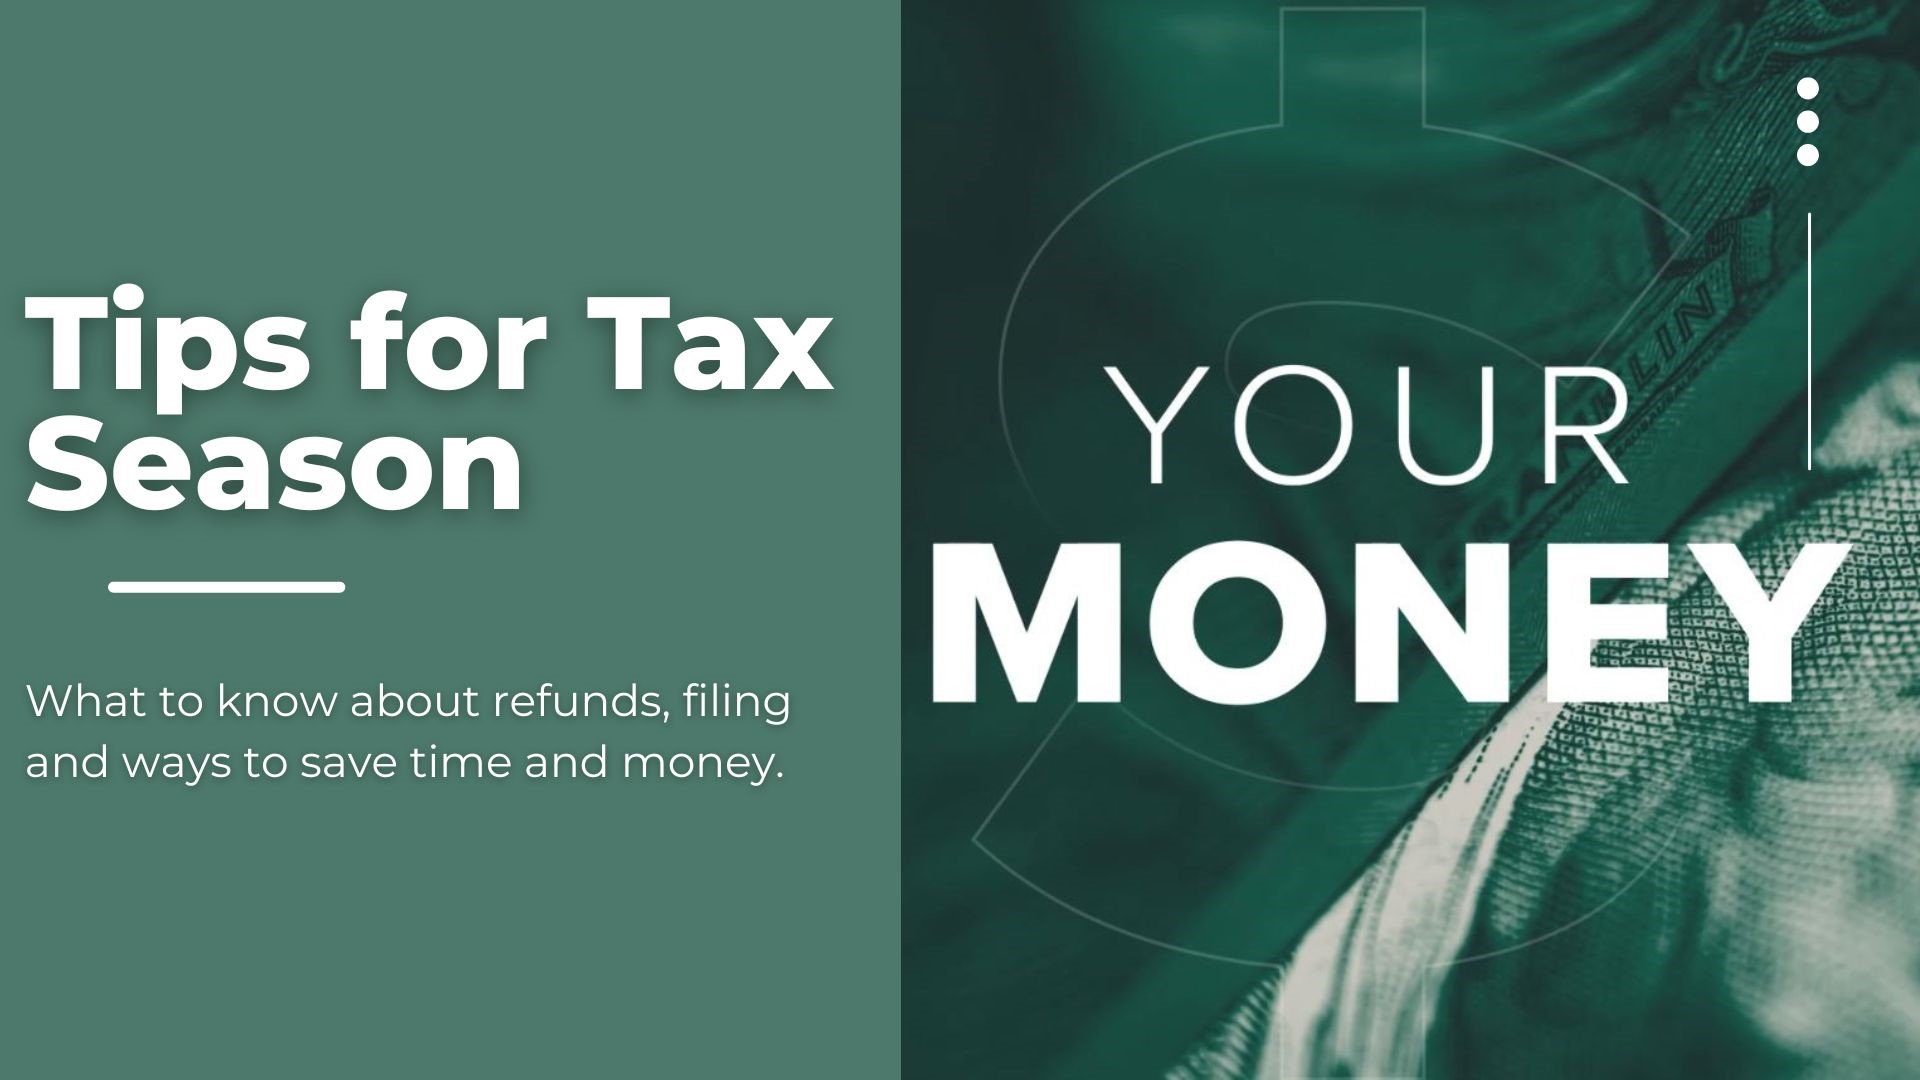 It is officially tax season! What you need to know before you file, what to expect with this year's refunds and tips to save time and money.